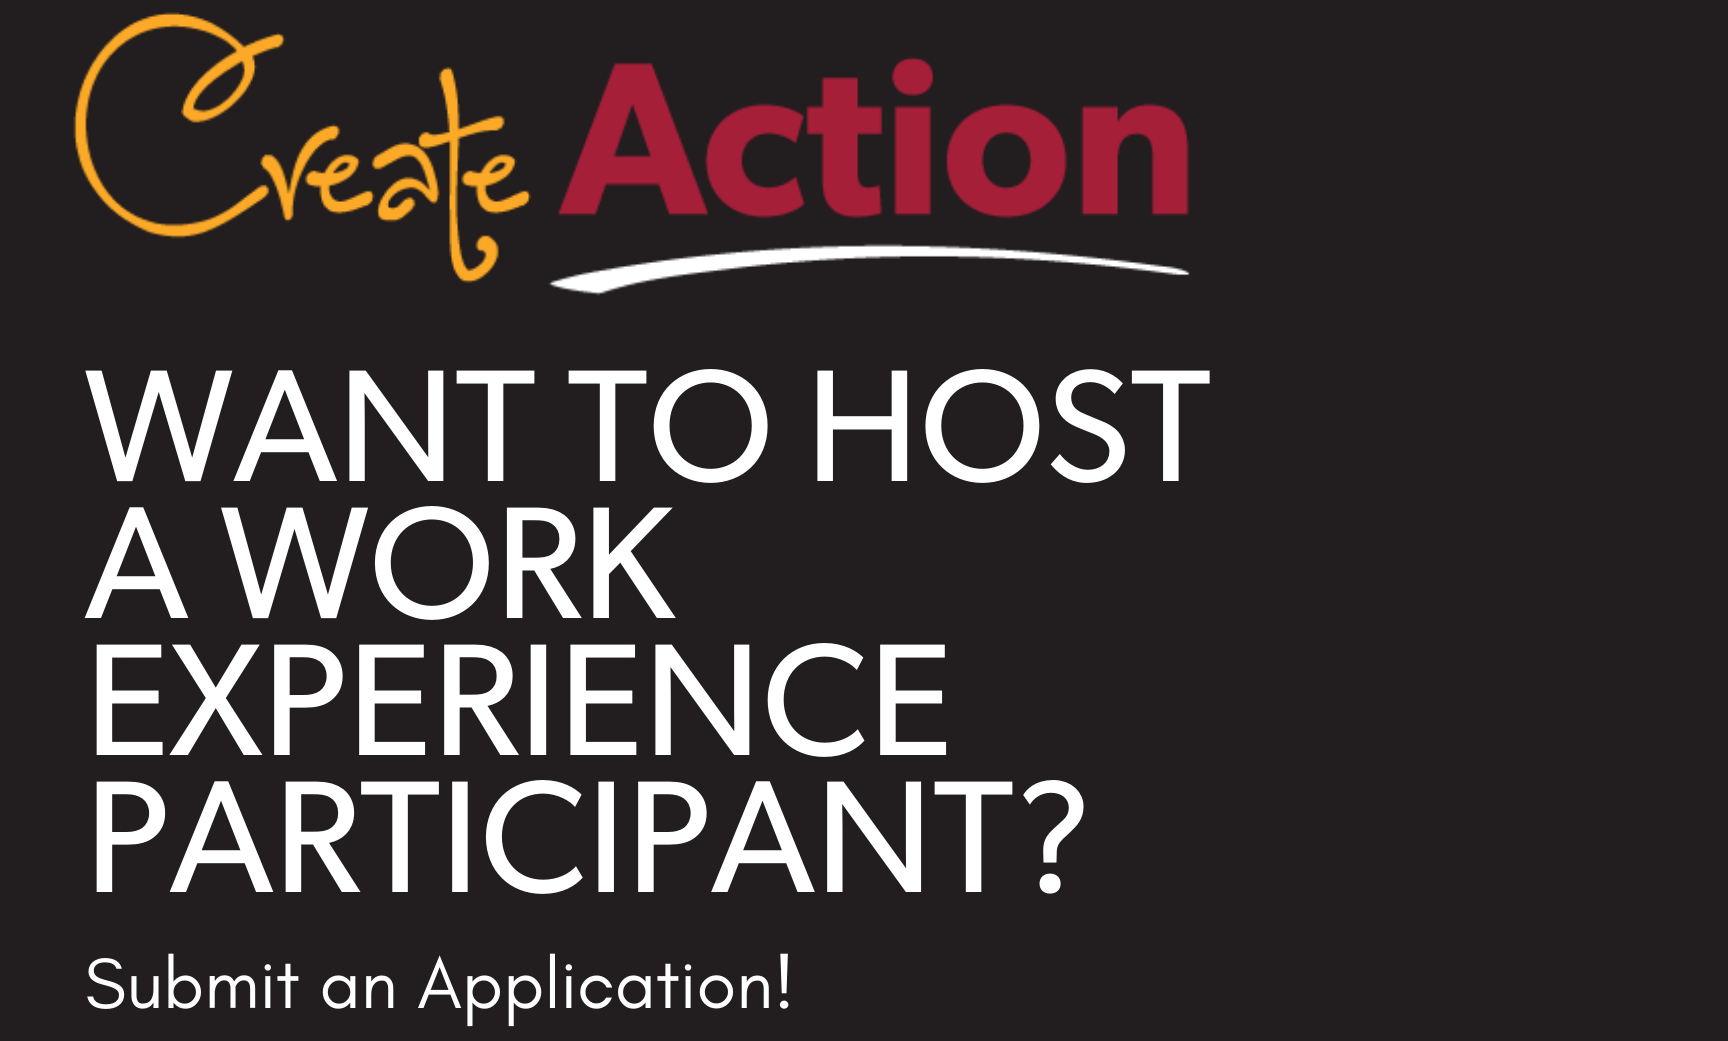 Want to host a work experience participant? Submit an application!